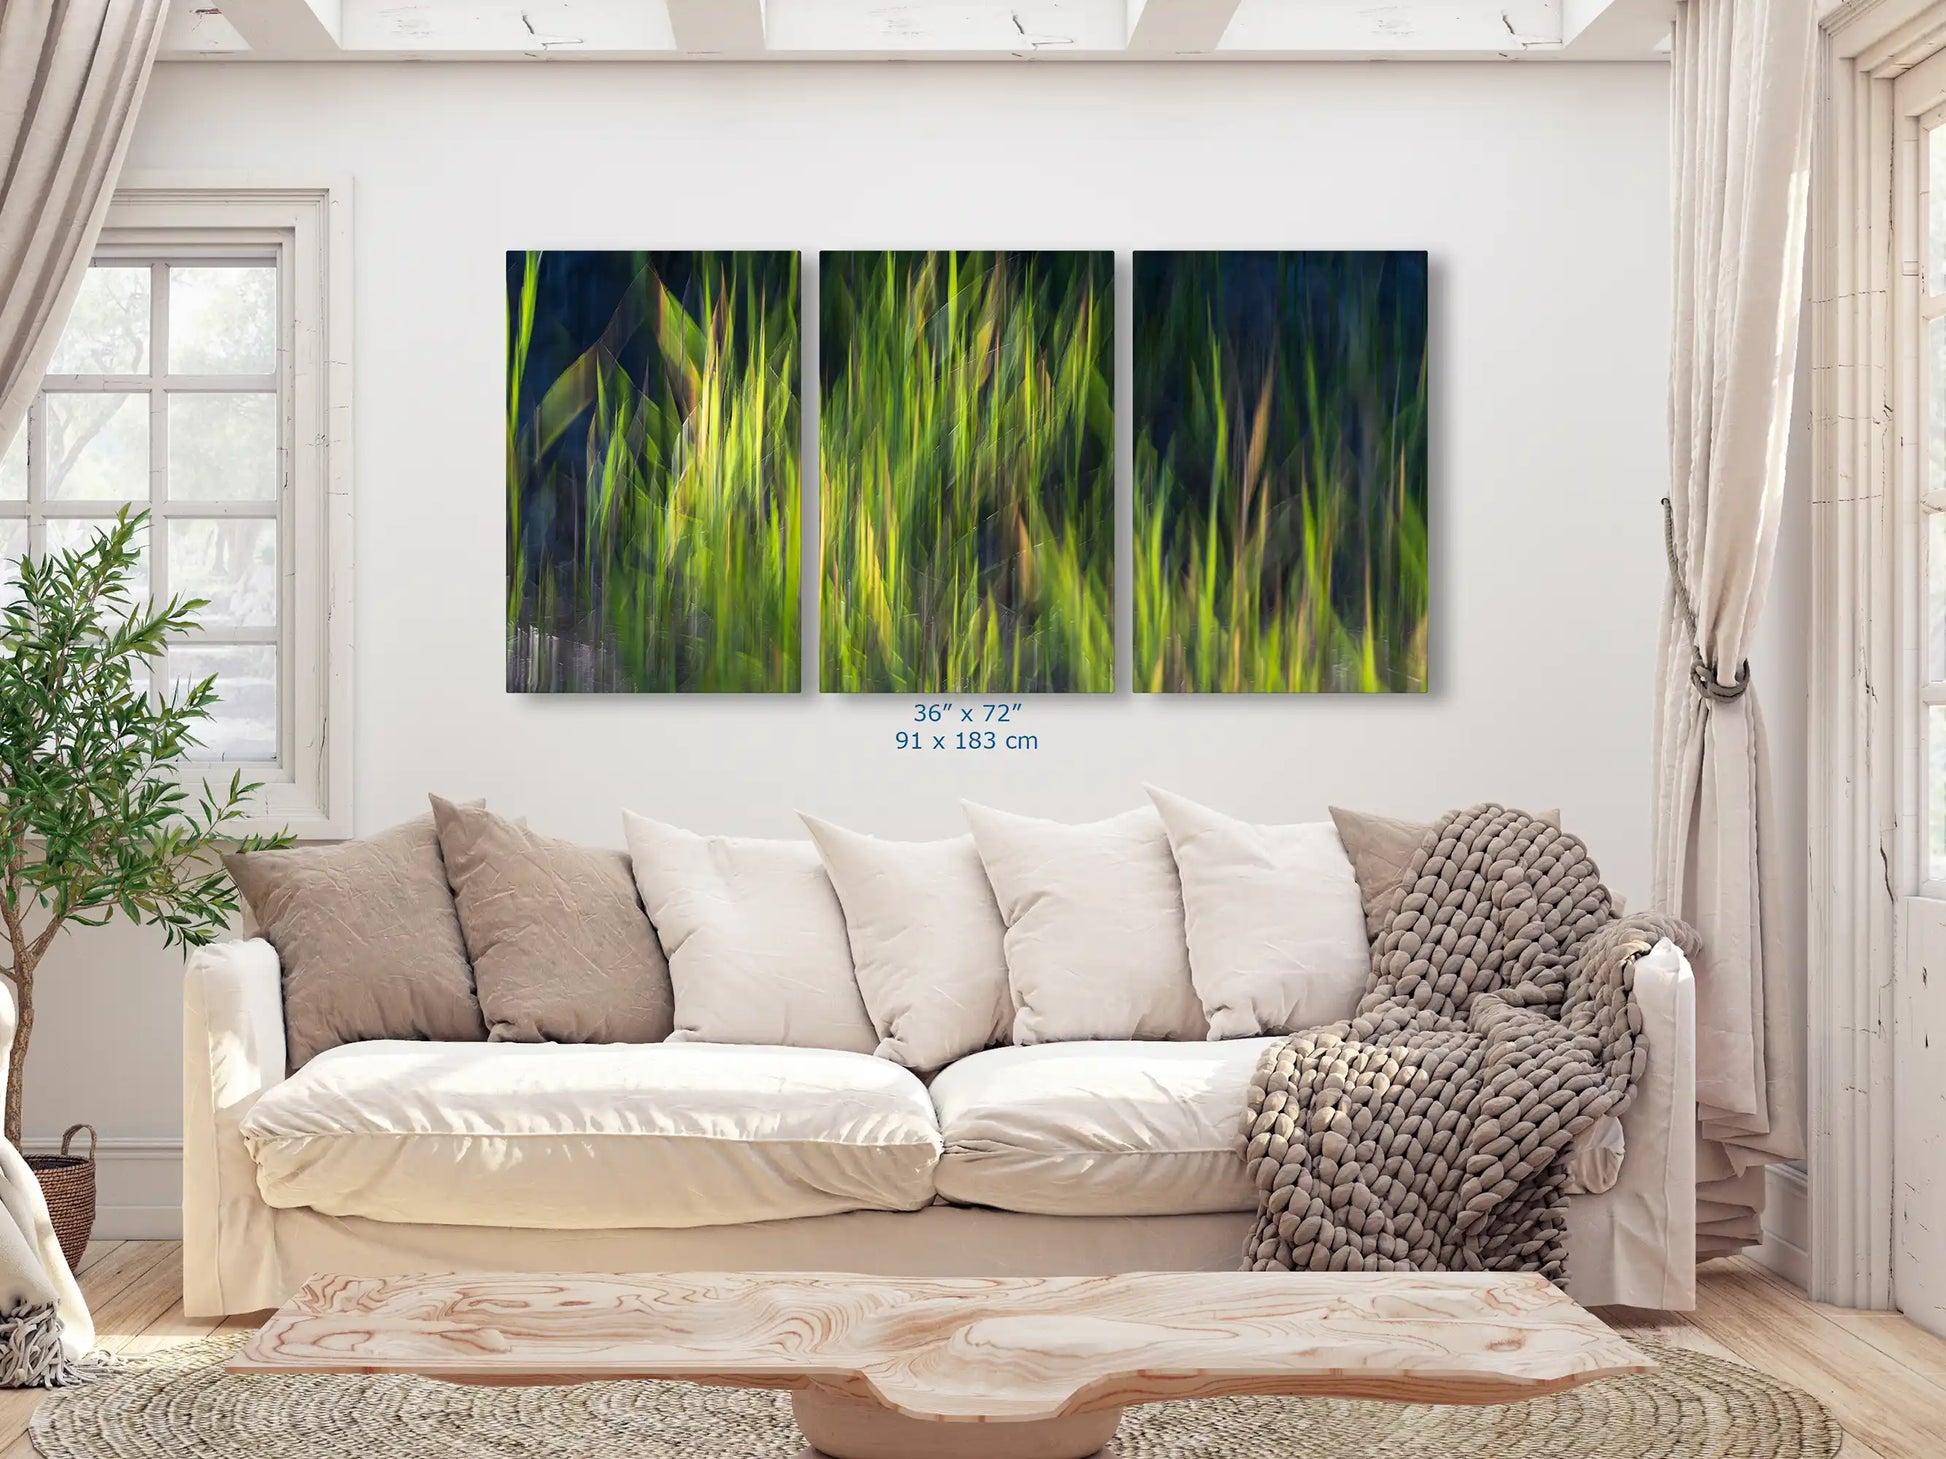 A grand 36"x72" canvas print, with a lively abstract green pattern, dominates the living space above a cozy sofa, integrating art with everyday living.